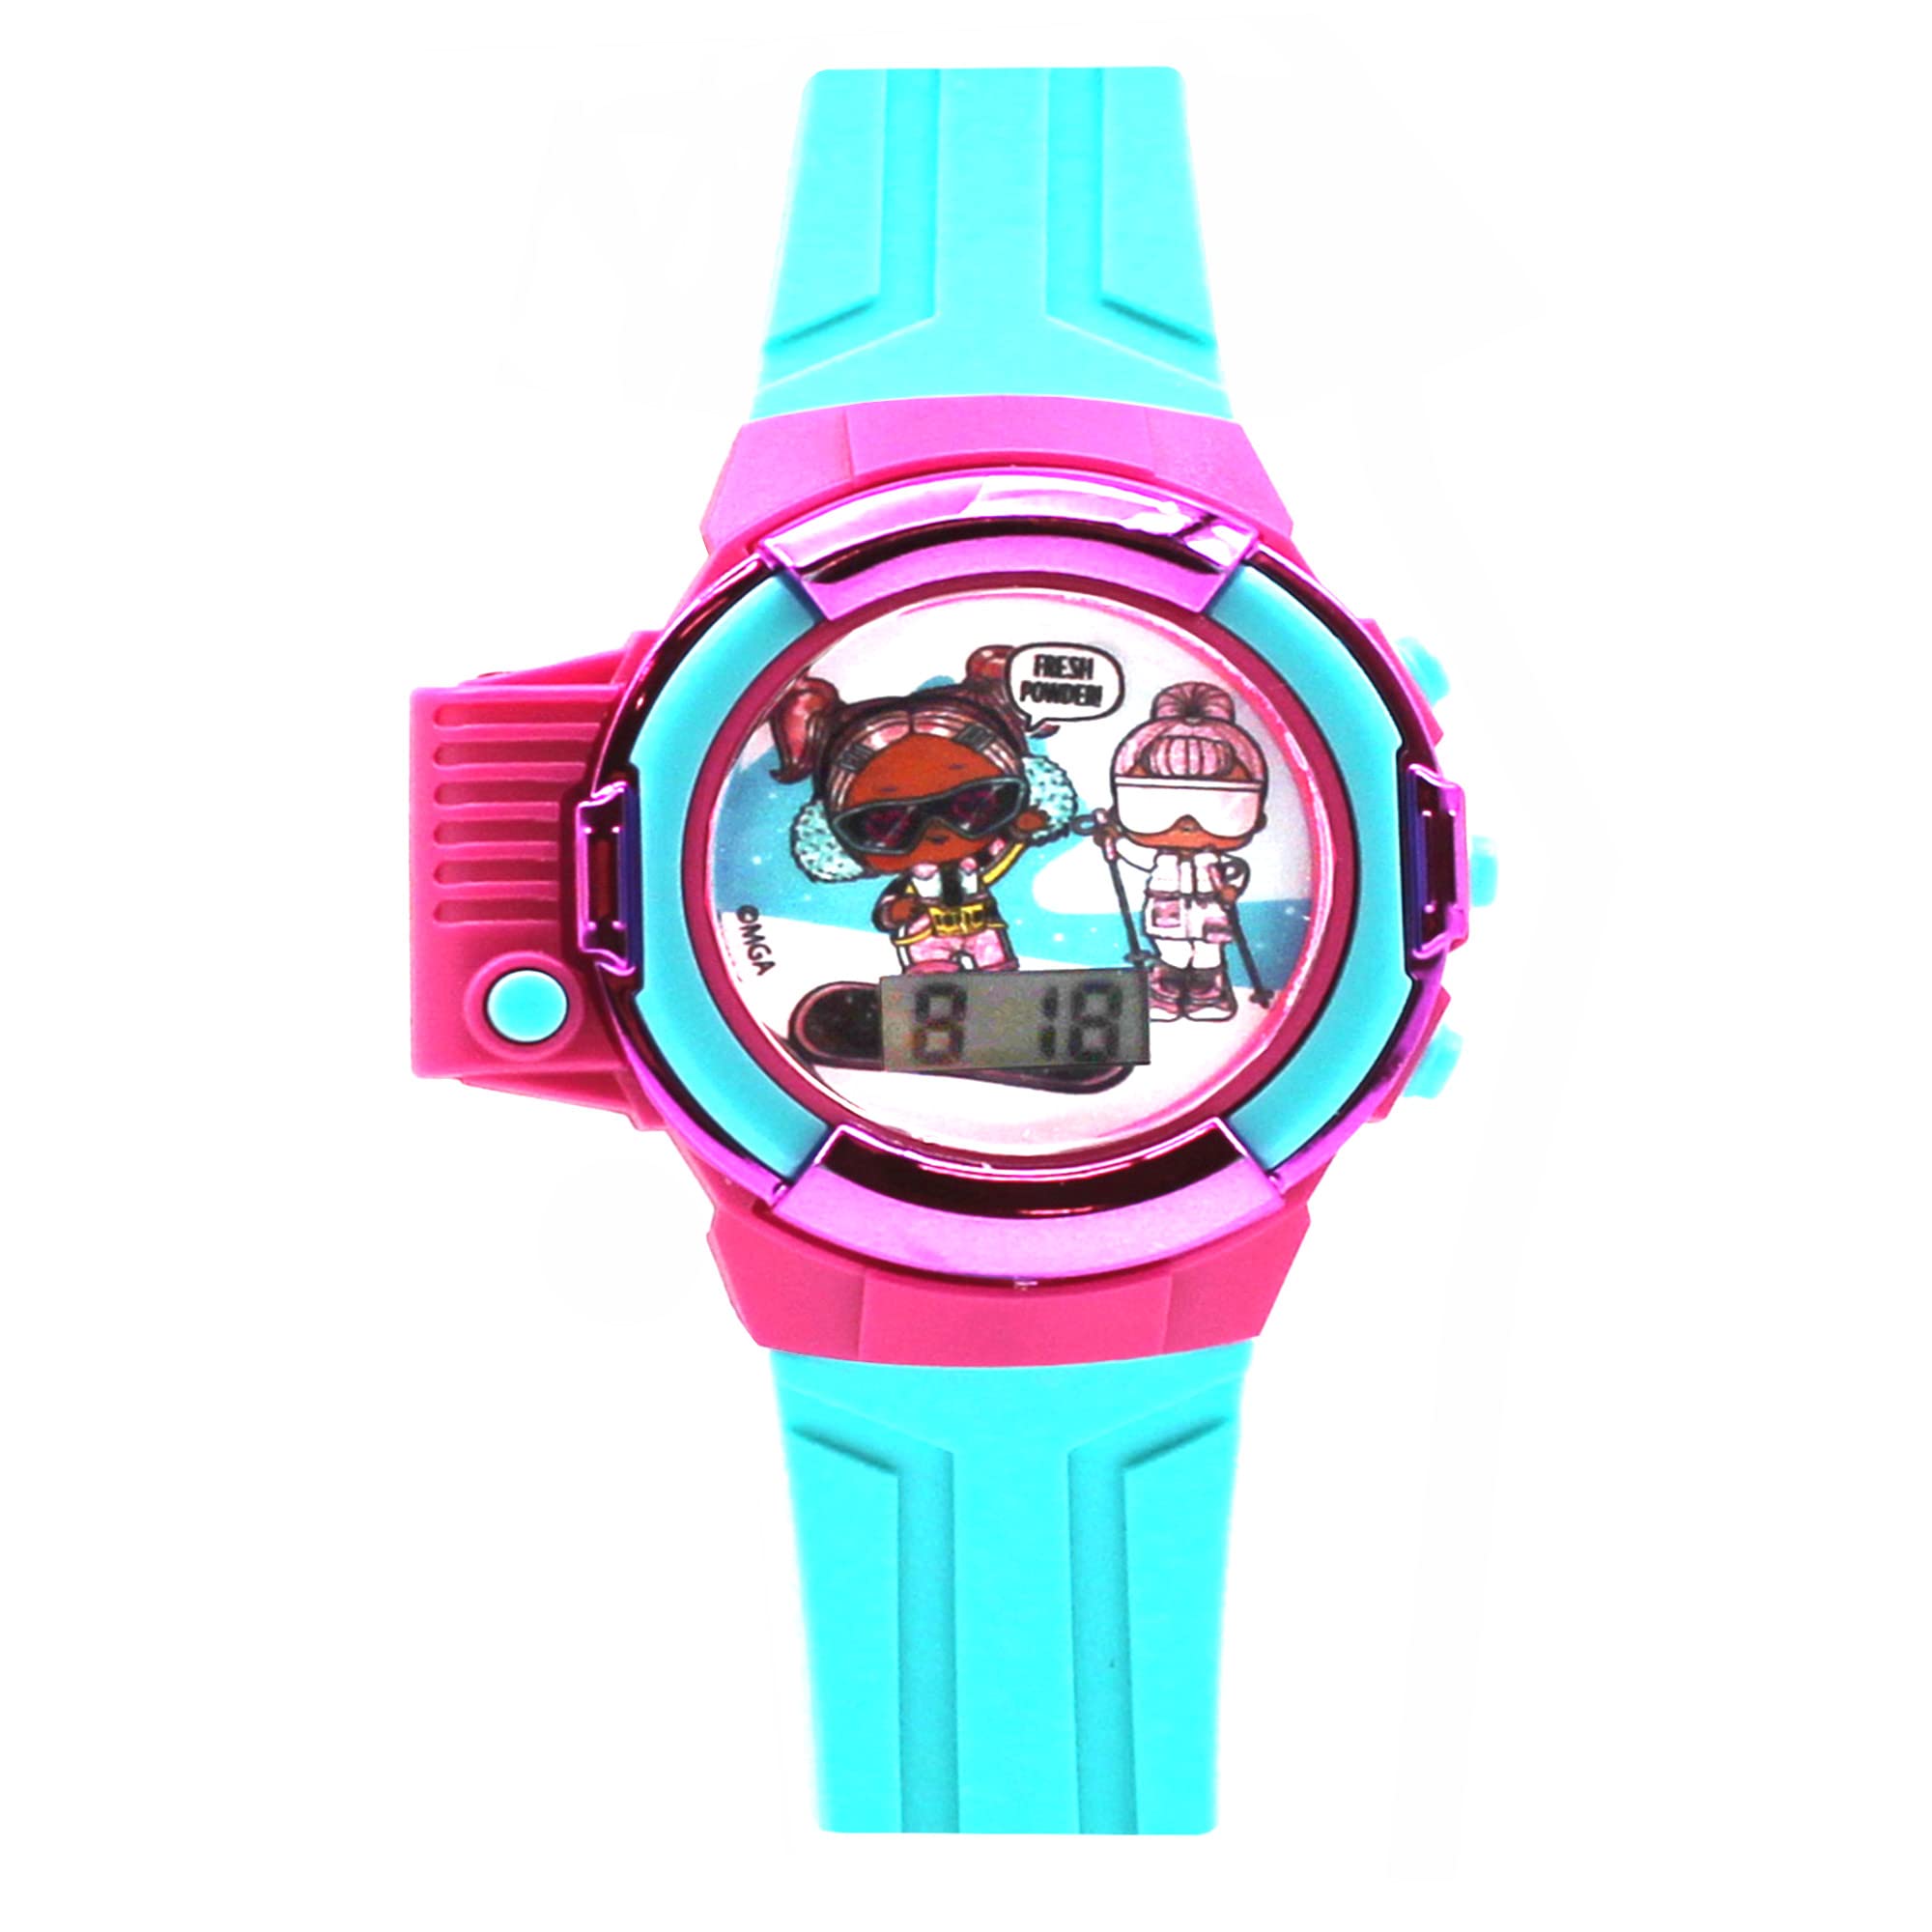 Accutime Kids MGA LOL Surprise Pink Turquoise Digital LCD Quartz Wrist Watch with Flashlight Turquoise Strap for Girls Bo